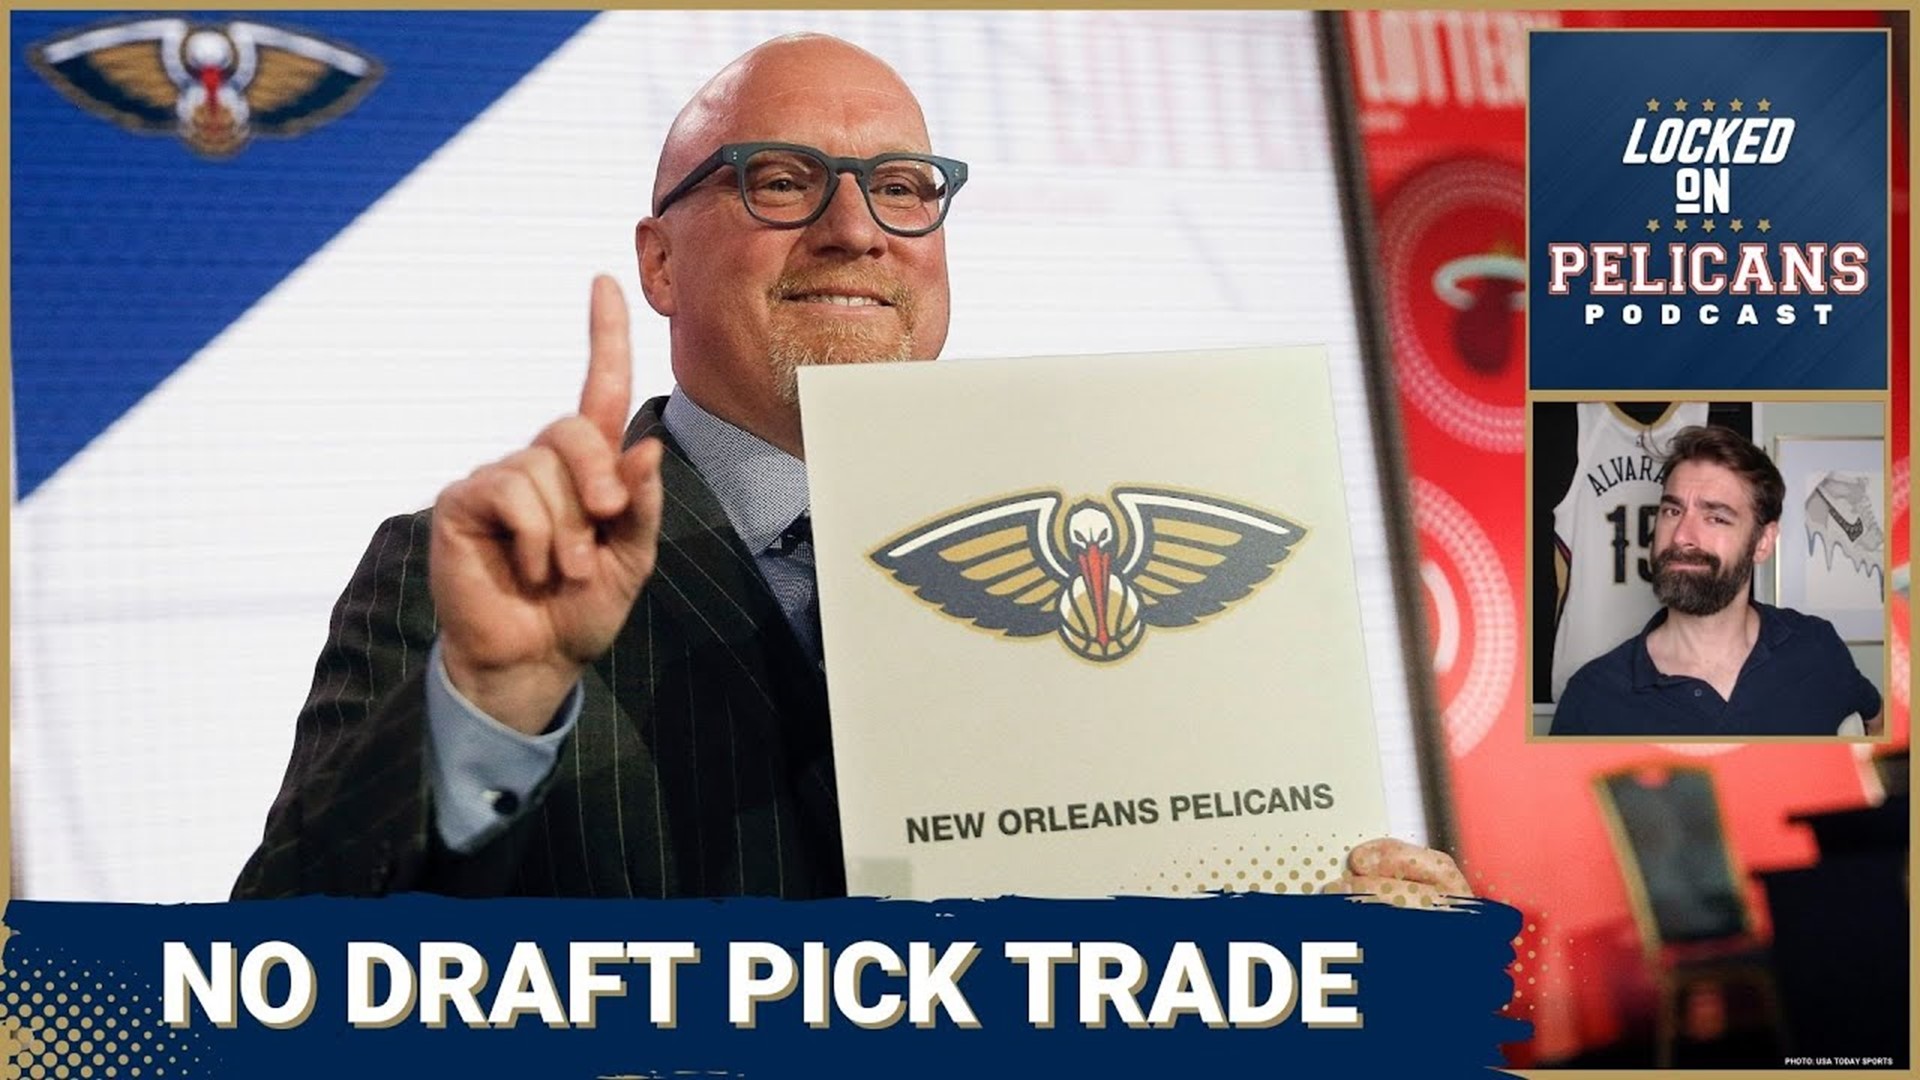 It seems like the New Orleans Pelicans want to trade the 14th pick in the NBA Draft for a guy like Jaylen Brown, Karl-Anthony Towns, or Bradley Beal, but will they?